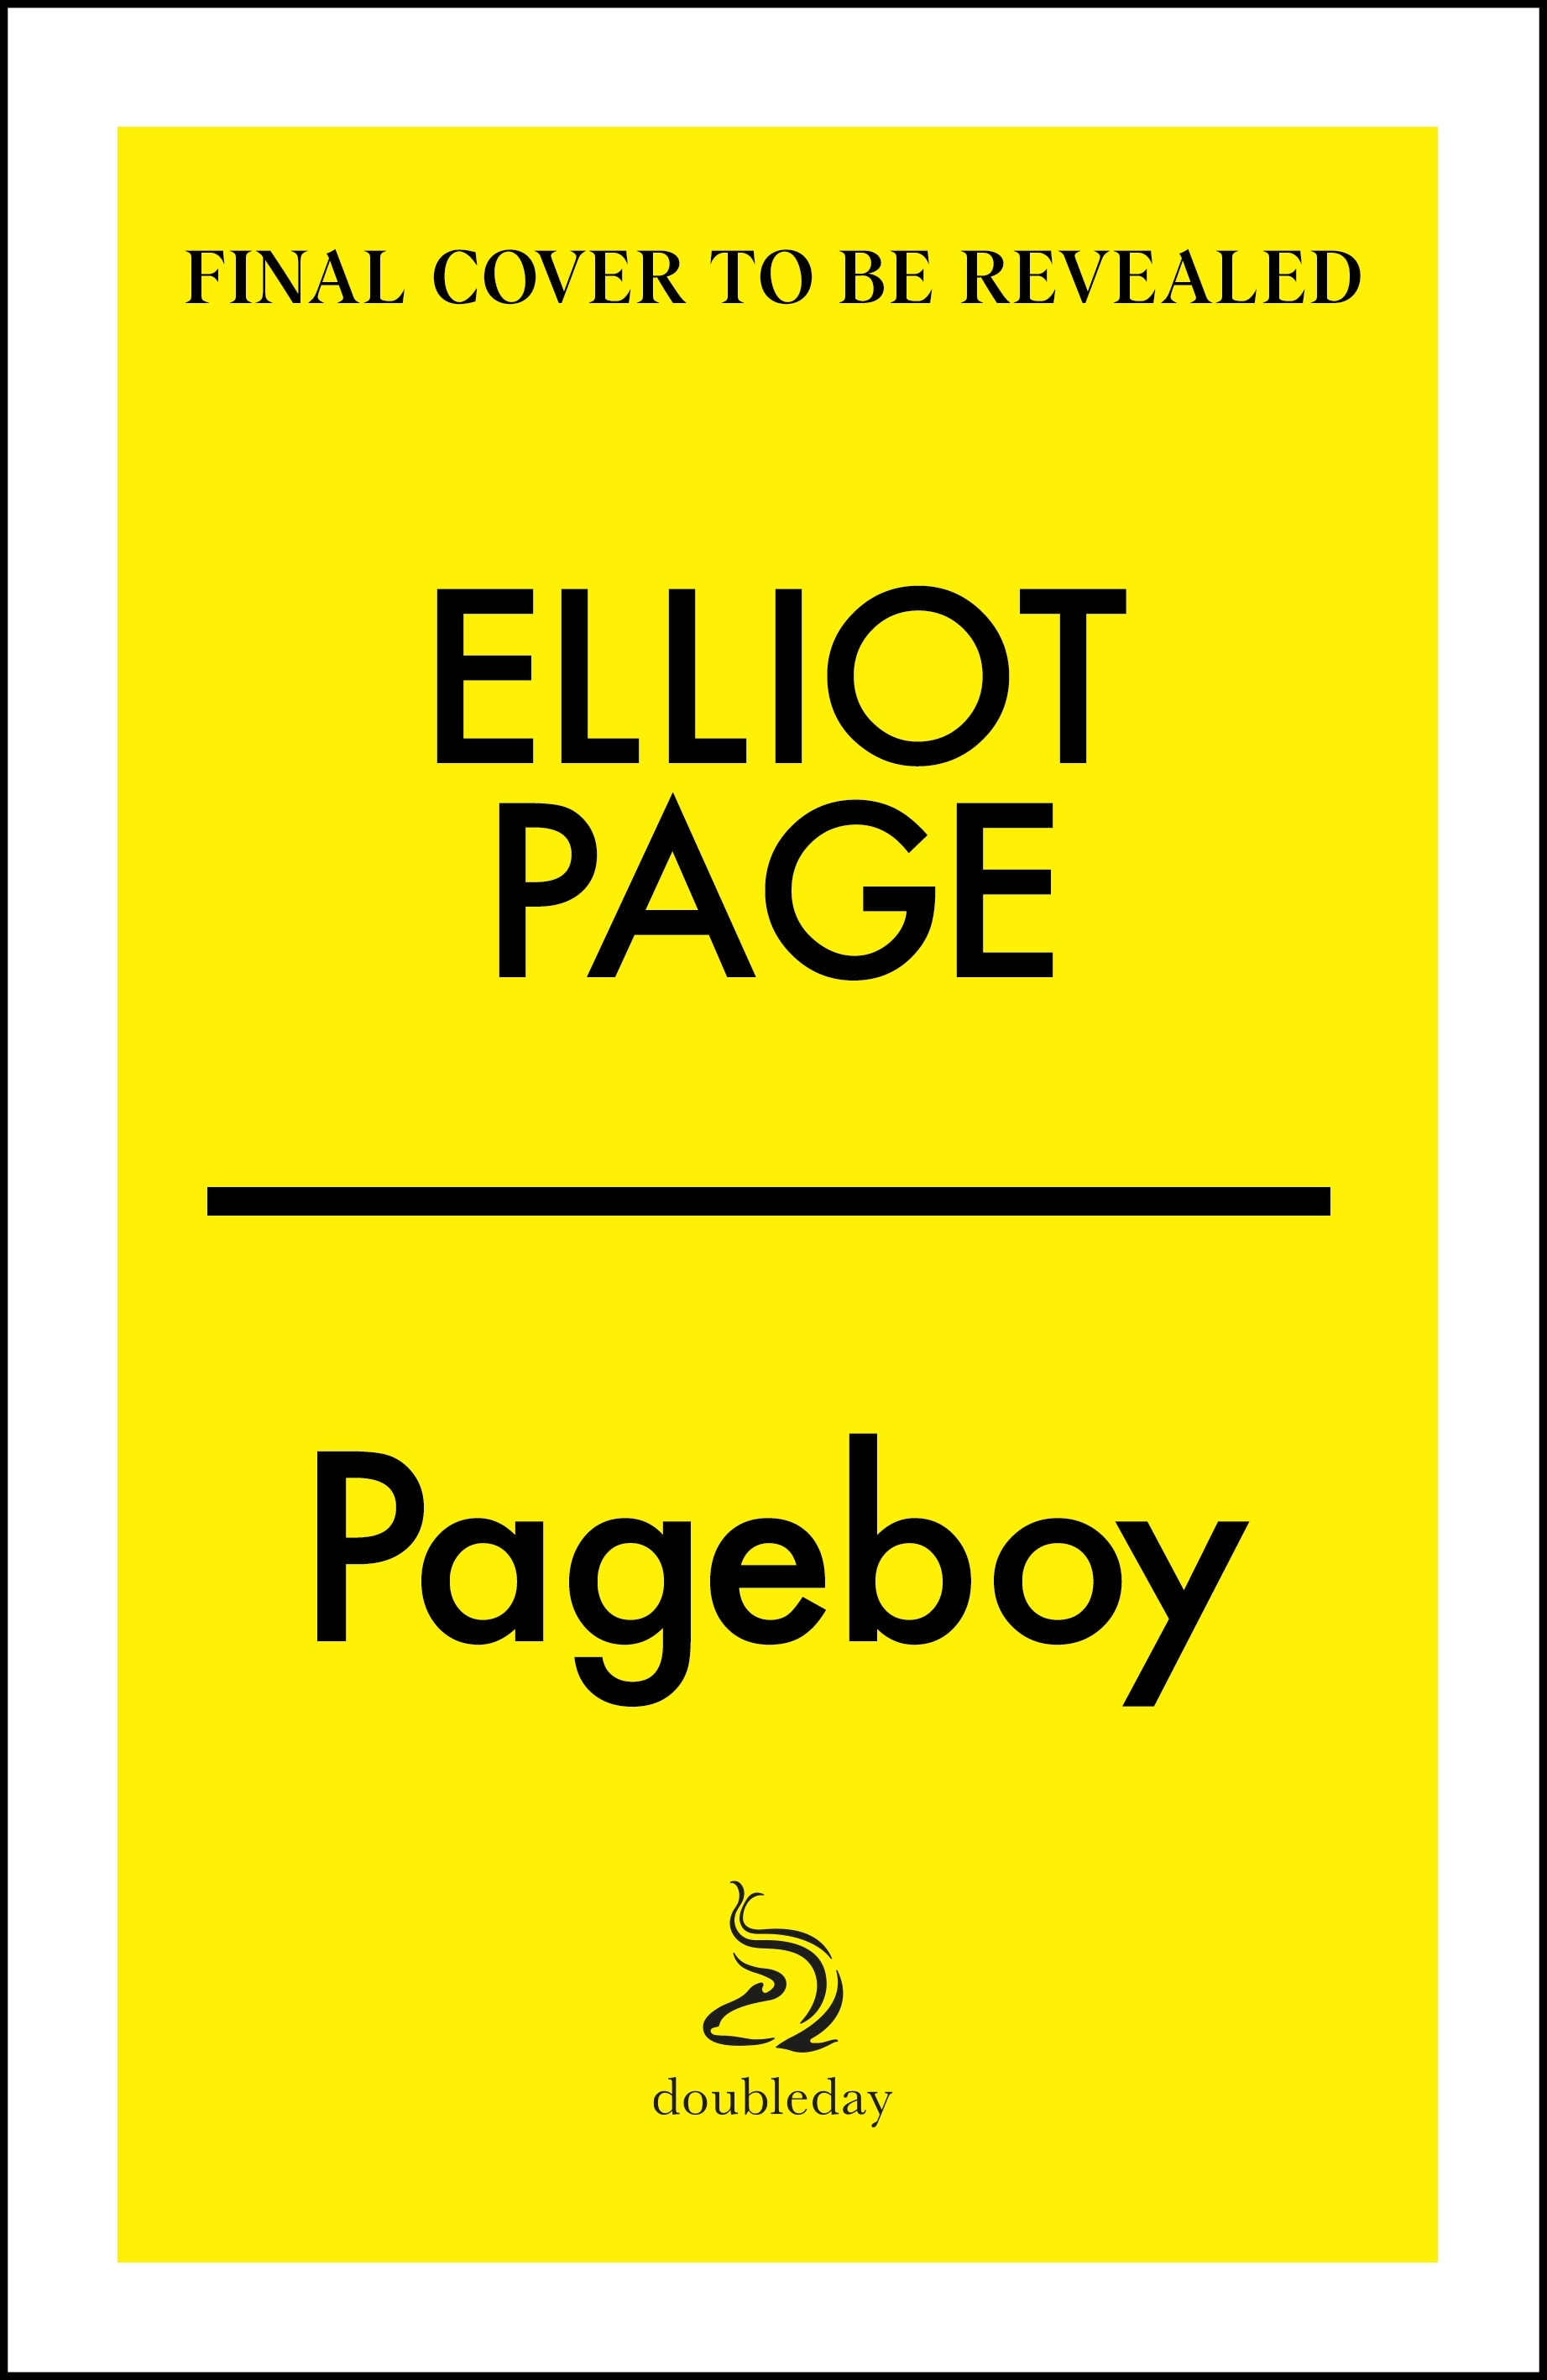 Book “Pageboy” by Elliot Page — May 16, 2023